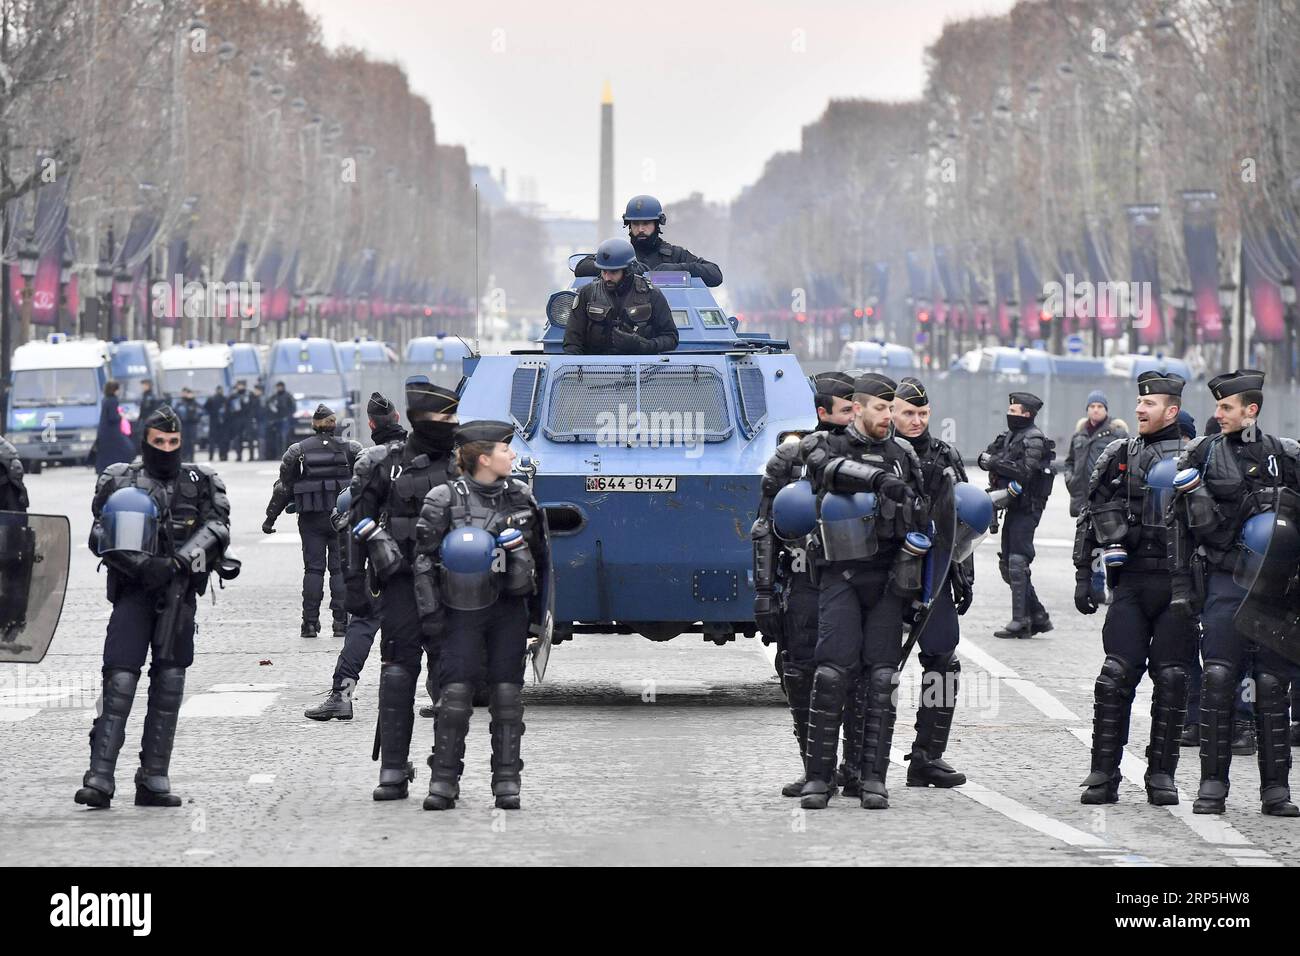 (181215) -- PARIS, Dec. 15, 2018 -- French gendarmes guard with an armed vehicle on the Champs-Elysees Avenue in Paris, France, on Dec. 15, 2018. French government planned tough security measures by mobilizing thousands of officers and using armored vehicles to handle more threats of violence as Yellow Vests are set to stage a fresh round of nationwide protests on Saturday, despite President Emmanuel Macron s measures seeking to quell public anger over poor revenue and soaring living costs. ) FRANCE-PARIS- YELLOW VESTS -PROTEST ChenxYichen PUBLICATIONxNOTxINxCHN Stock Photo